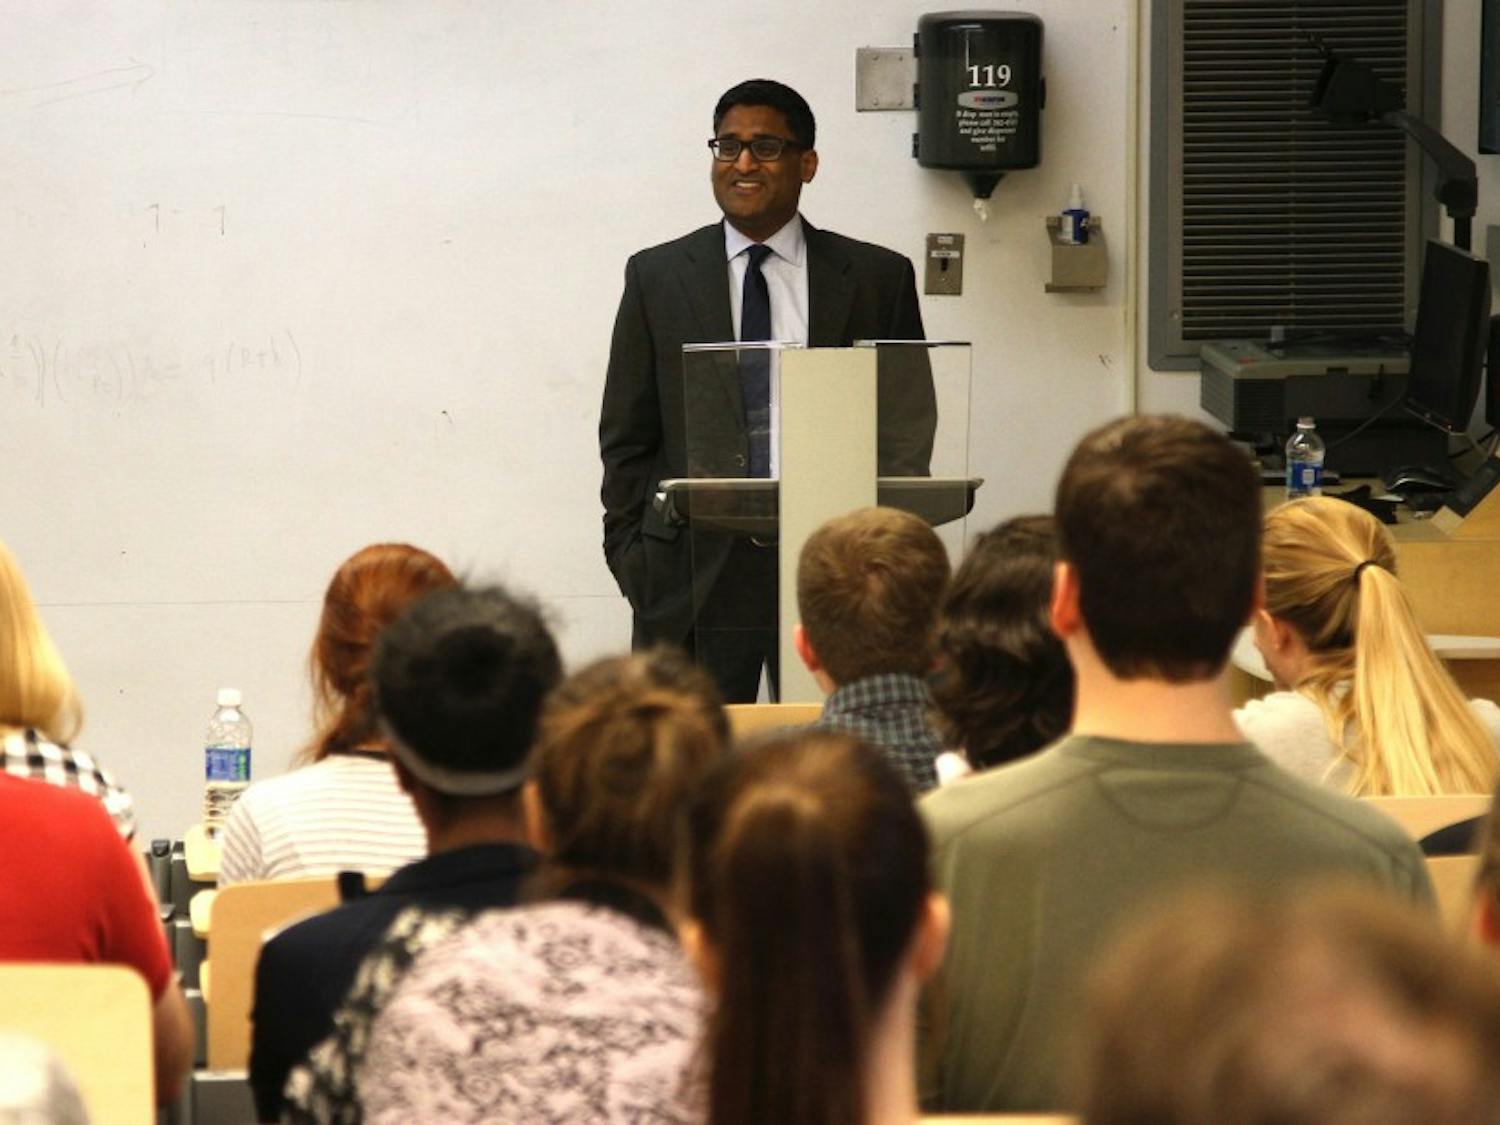 Ramesh Ponnuru explained that at times political correctness can hinder the robust exchange of ideas that he thinks should occur on college campuses.